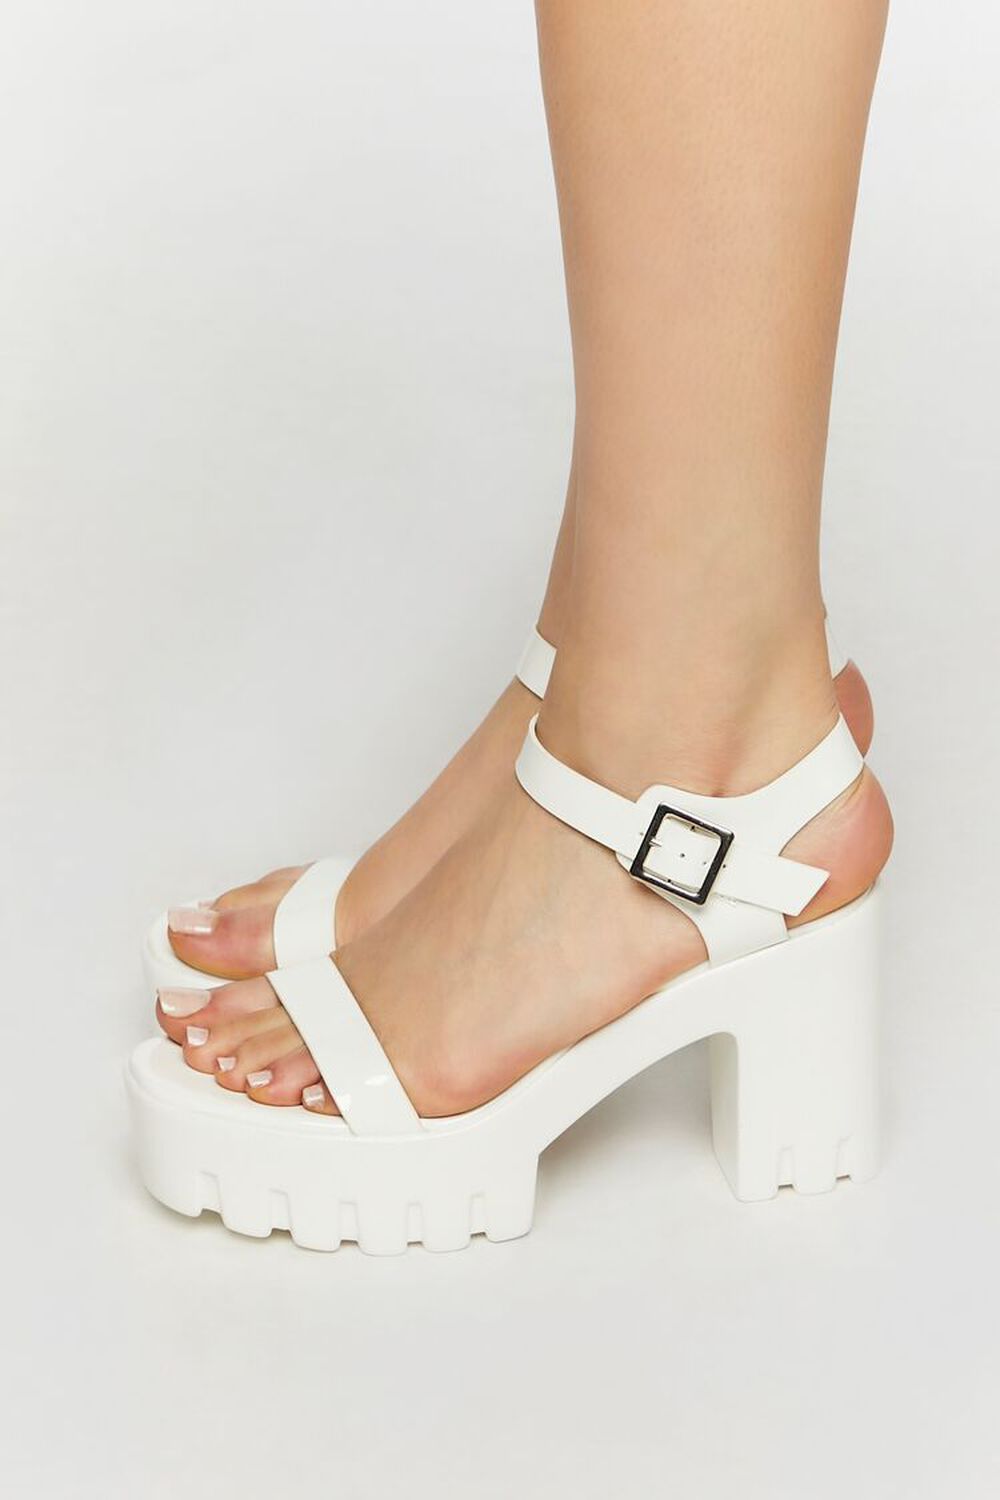 WHITE Faux Patent Leather Open-Toe Lug Heels, image 2